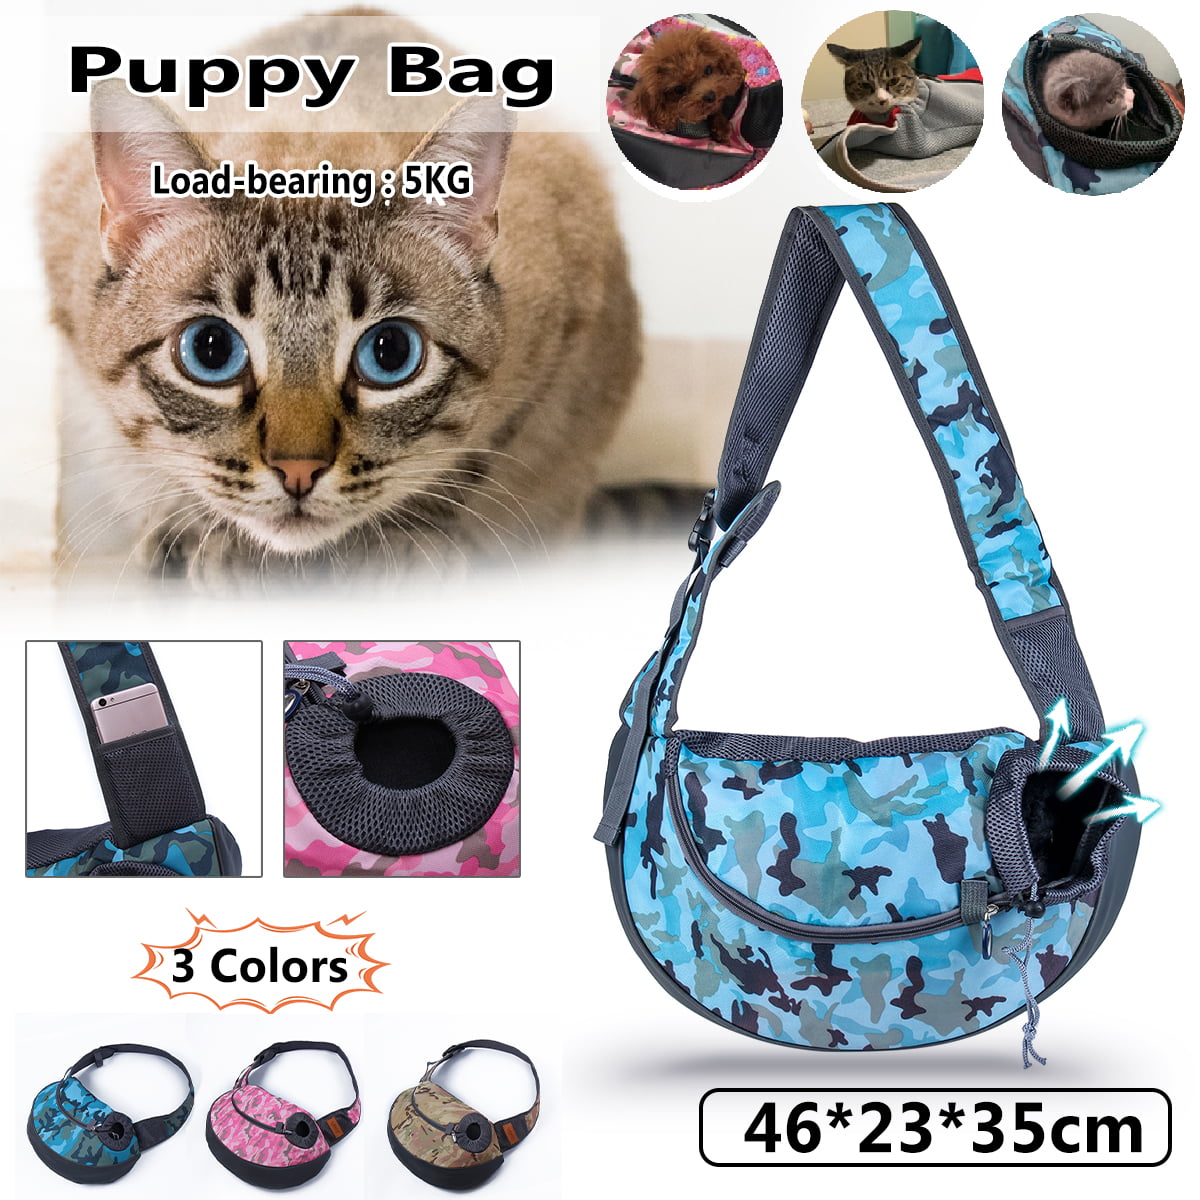 Black ITODA Head-out Cat Dog Carrier Handbag Foldable Travel Shoulder Bag Breathable Panoramic Vision Pet Carrying Bag Portable Pet Travel Shopping Bag Carrier Purse for Puppy Small Dogs Cats